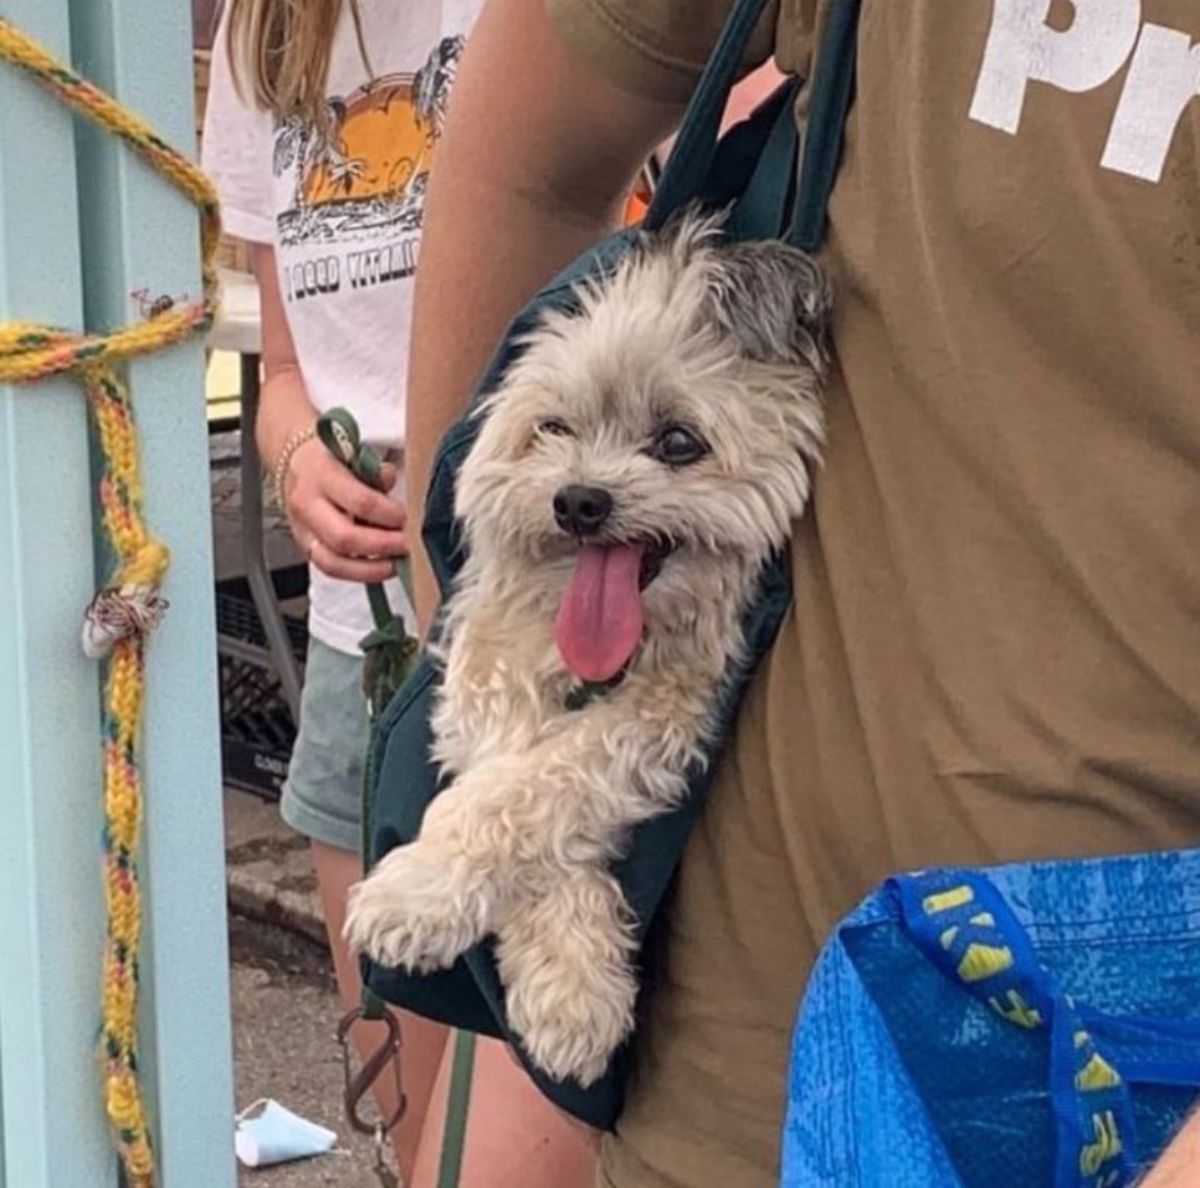 brown fluffy dog in a blue bag being worn by someone